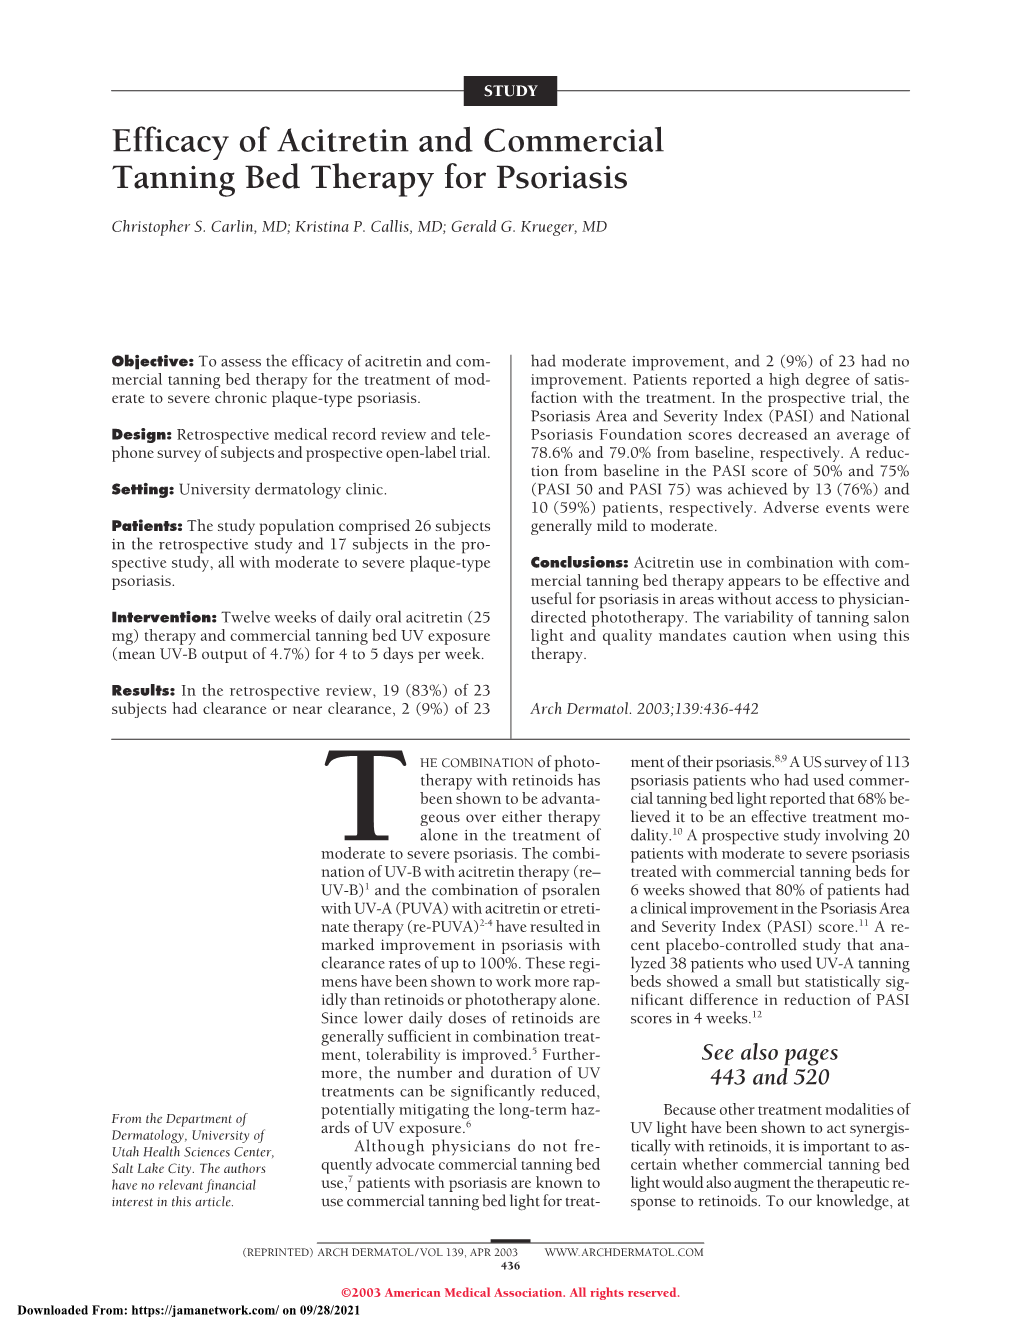 Efficacy of Acitretin and Commercial Tanning Bed Therapy for Psoriasis